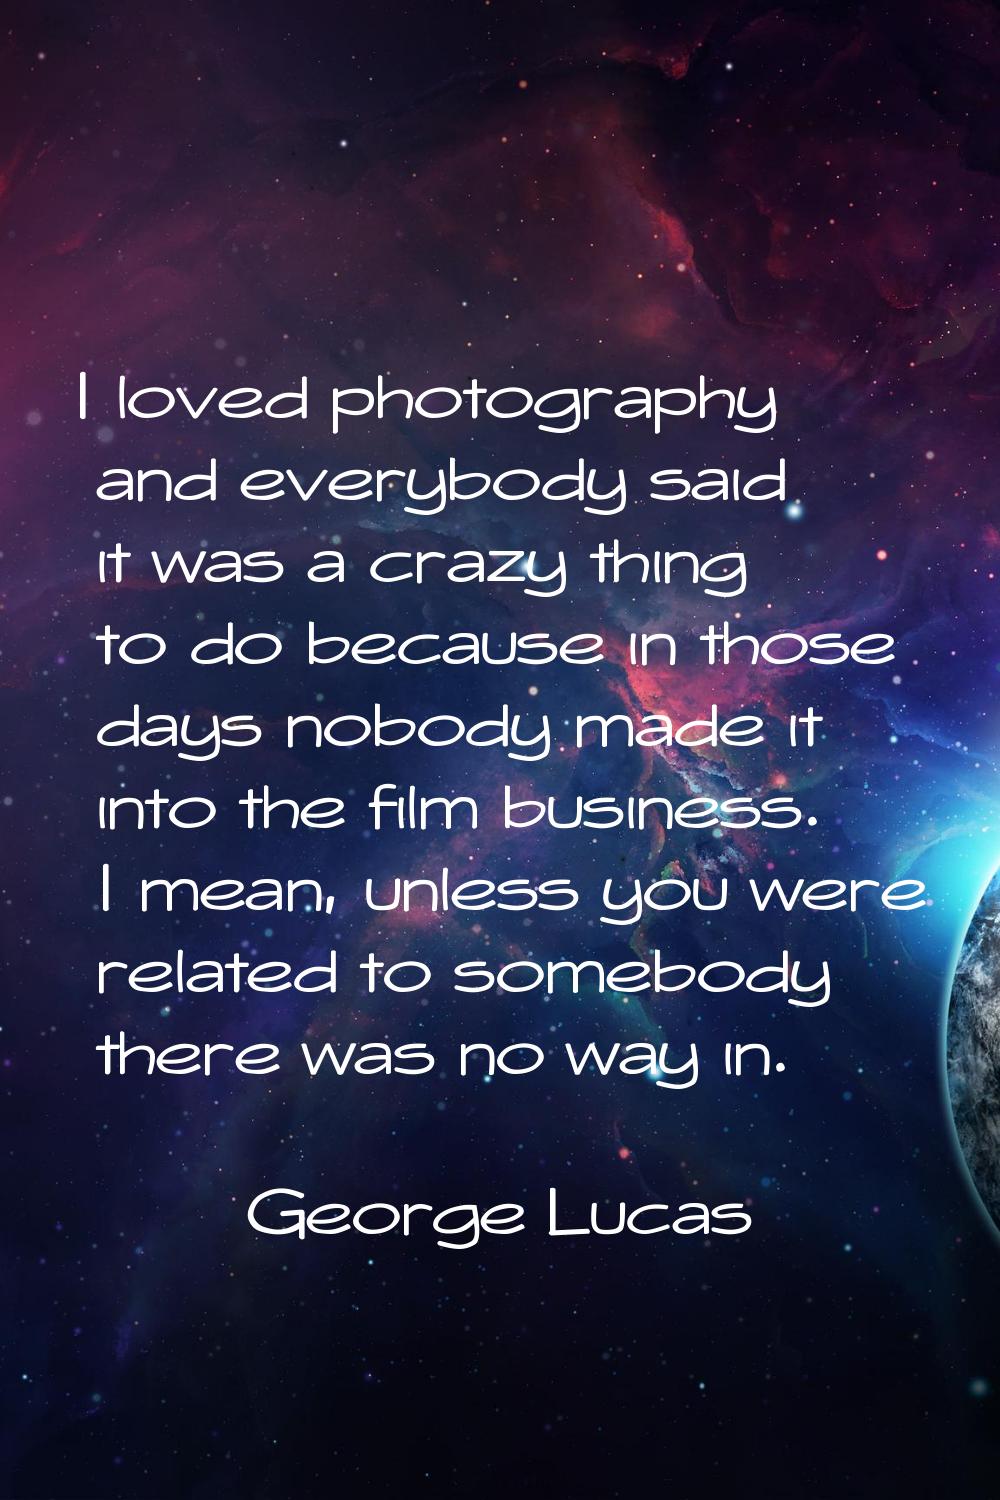 I loved photography and everybody said it was a crazy thing to do because in those days nobody made